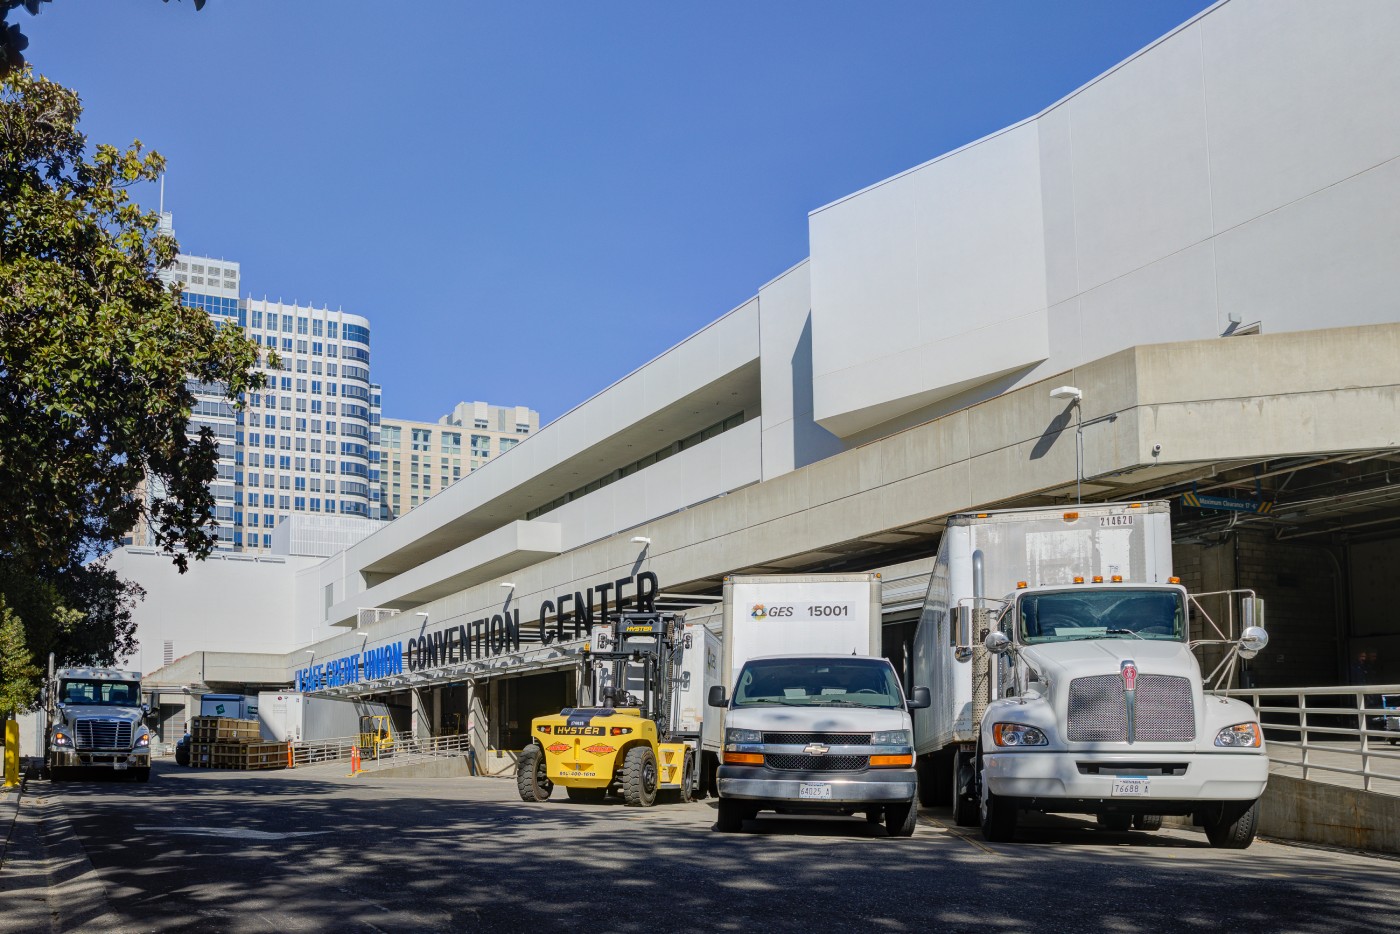 Image of trucks by the Safe Credit Union Convention Center